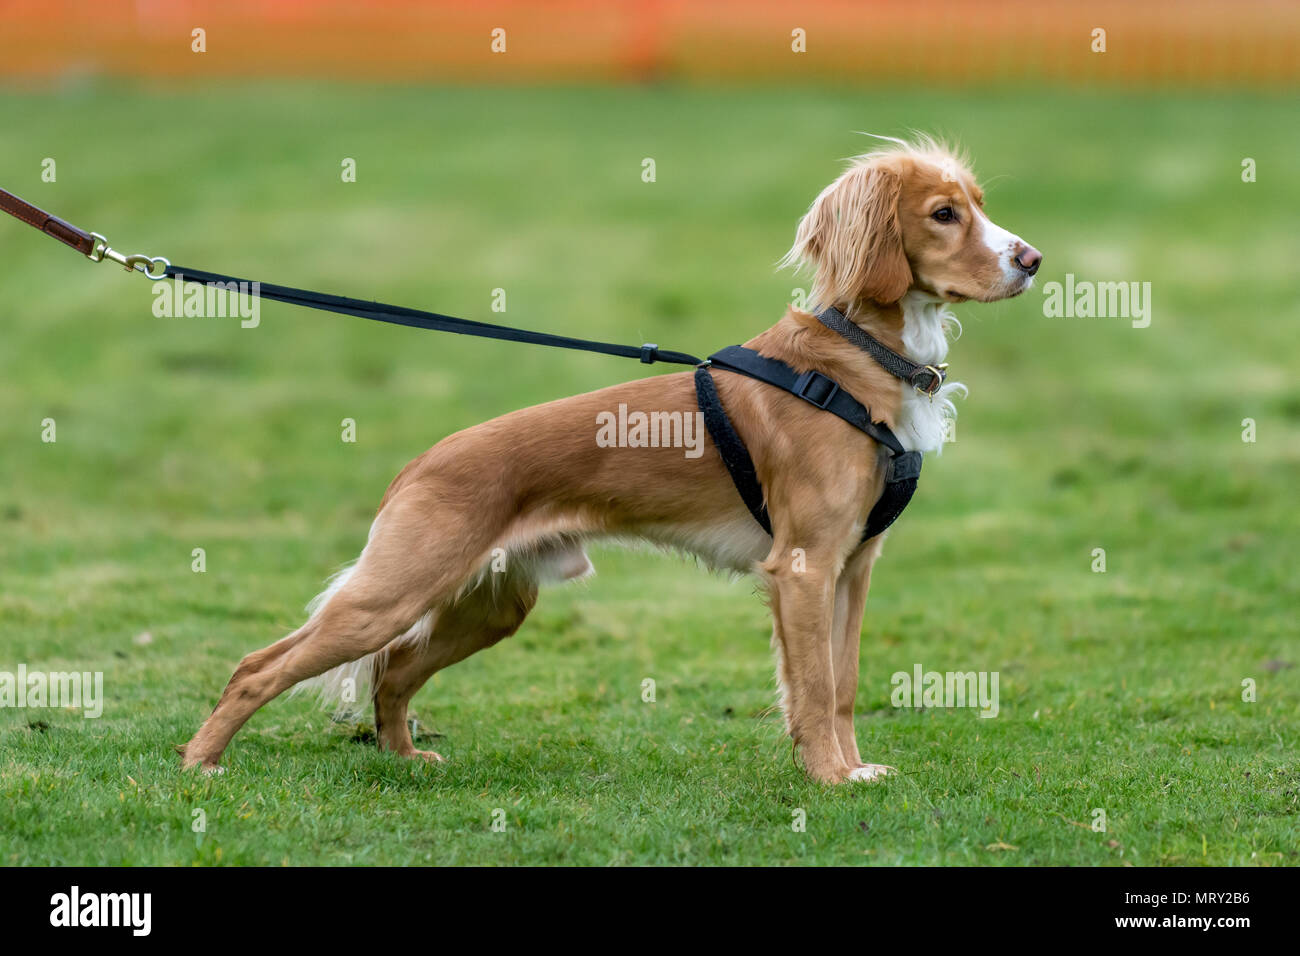 Brown and white pet male dog standing posed, wearing harness and with lead, on grass Stock Photo